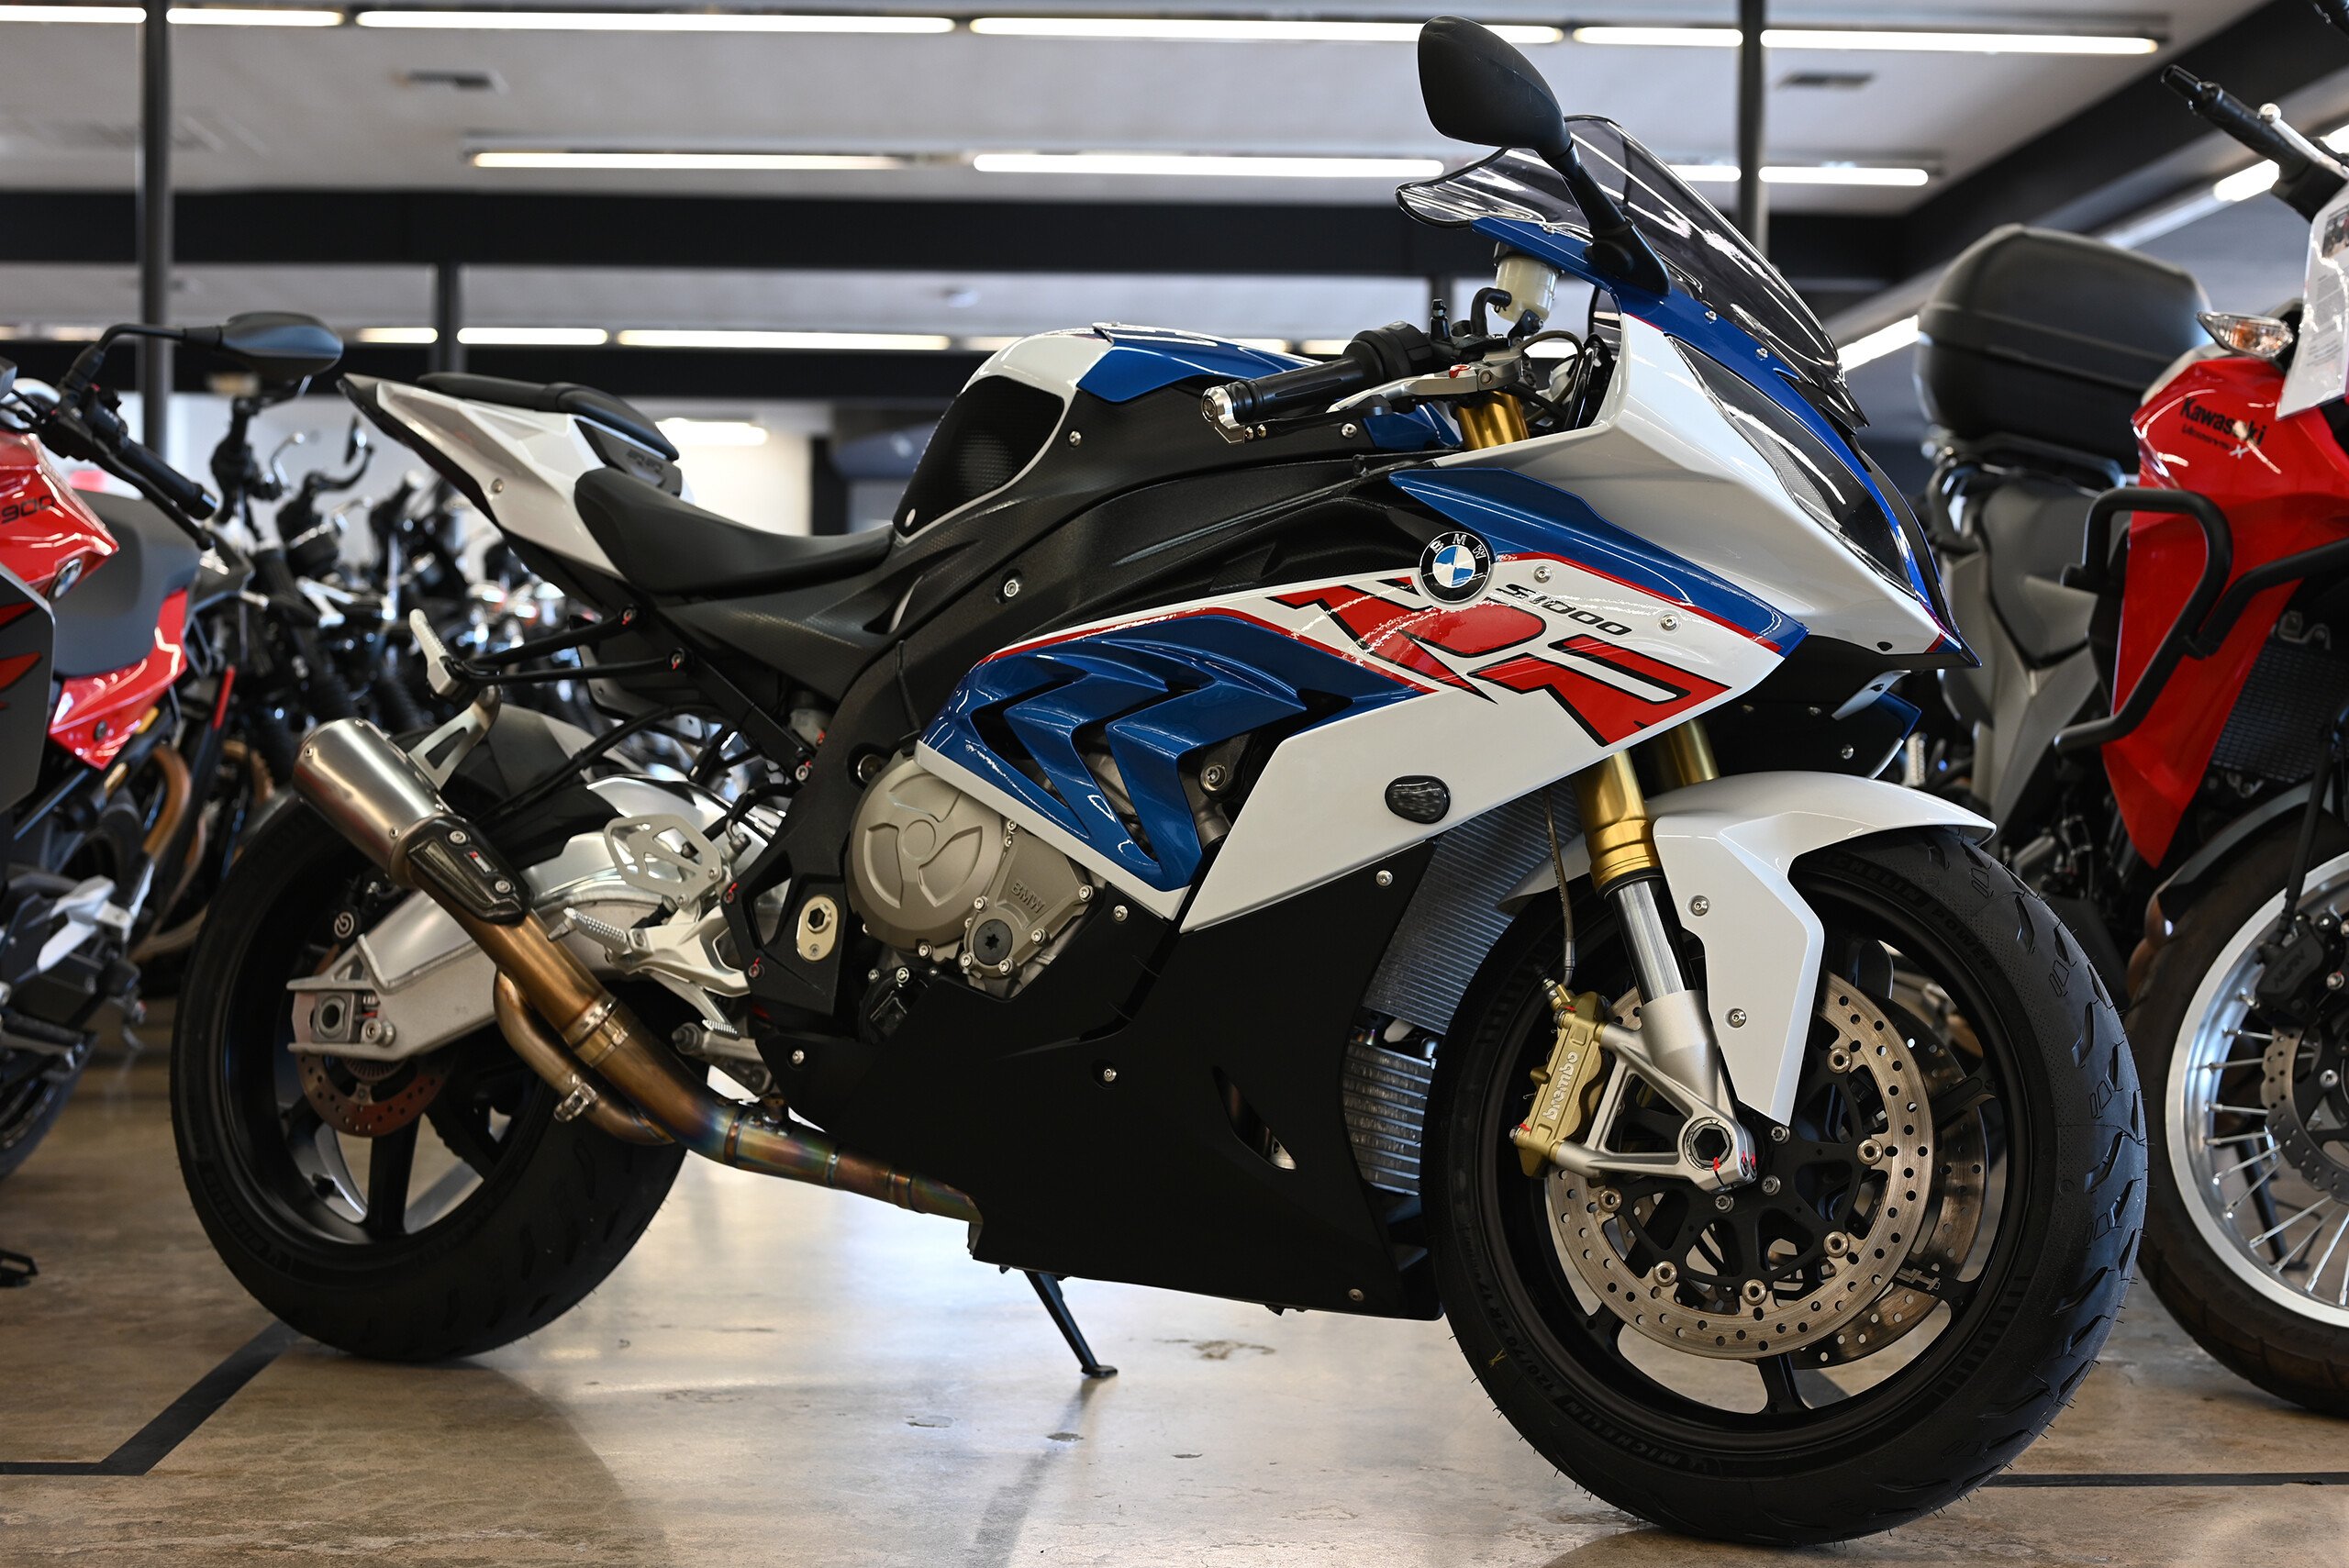 BMW S1000RR Motorcycles for Sale - Motorcycles on Autotrader